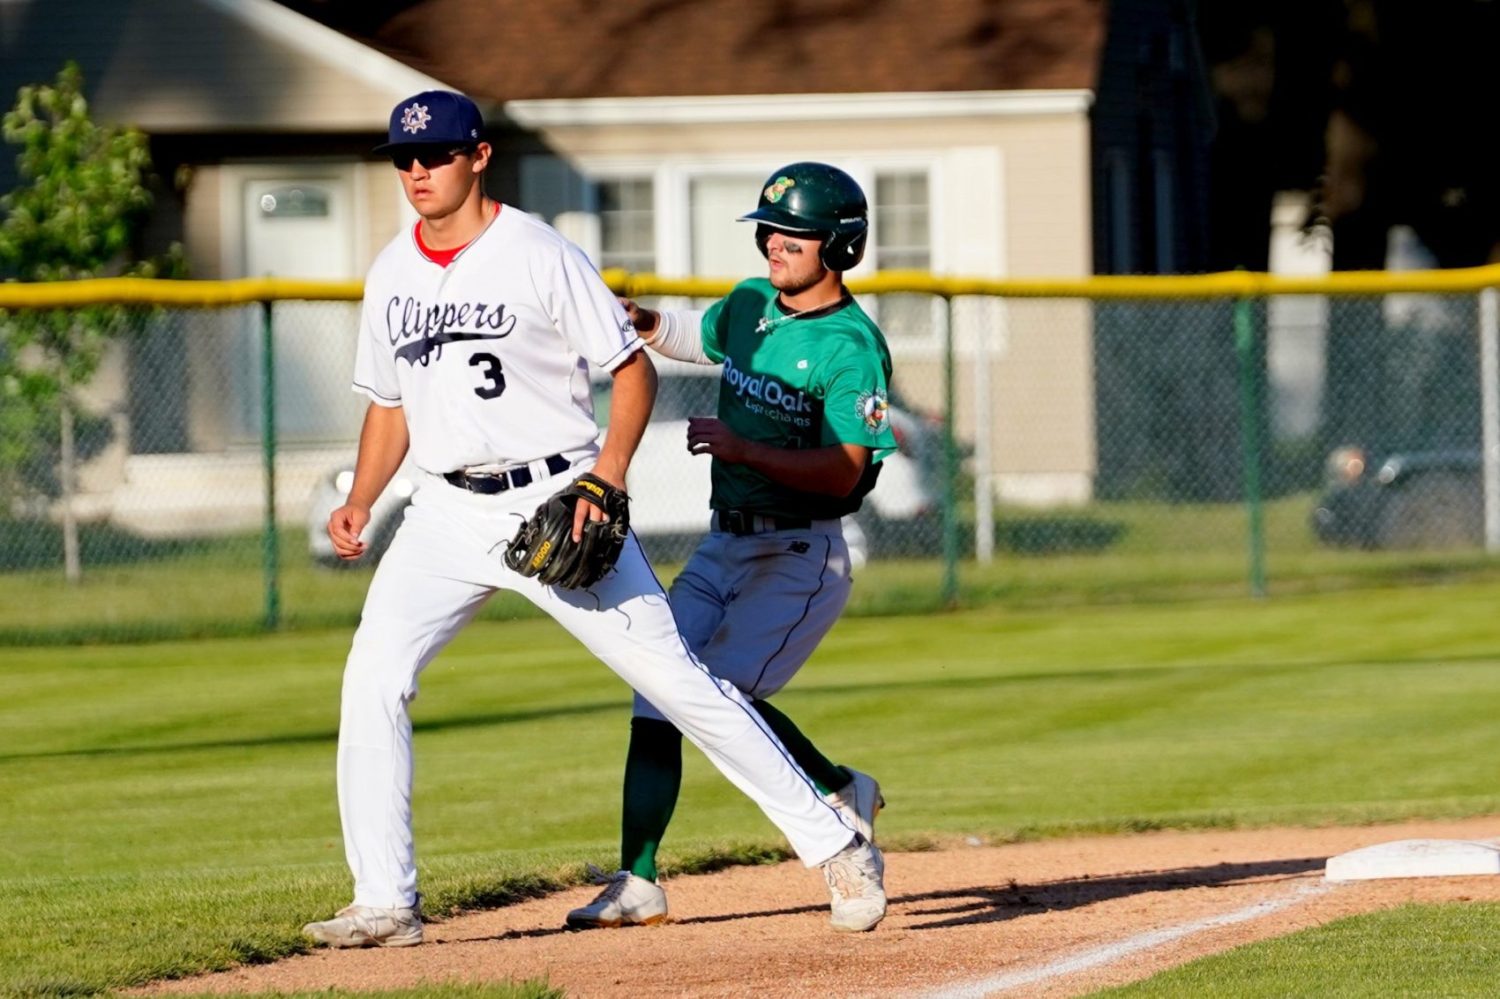 Muskegon Clippers drop opener of three-game weekend series with Royal Oak